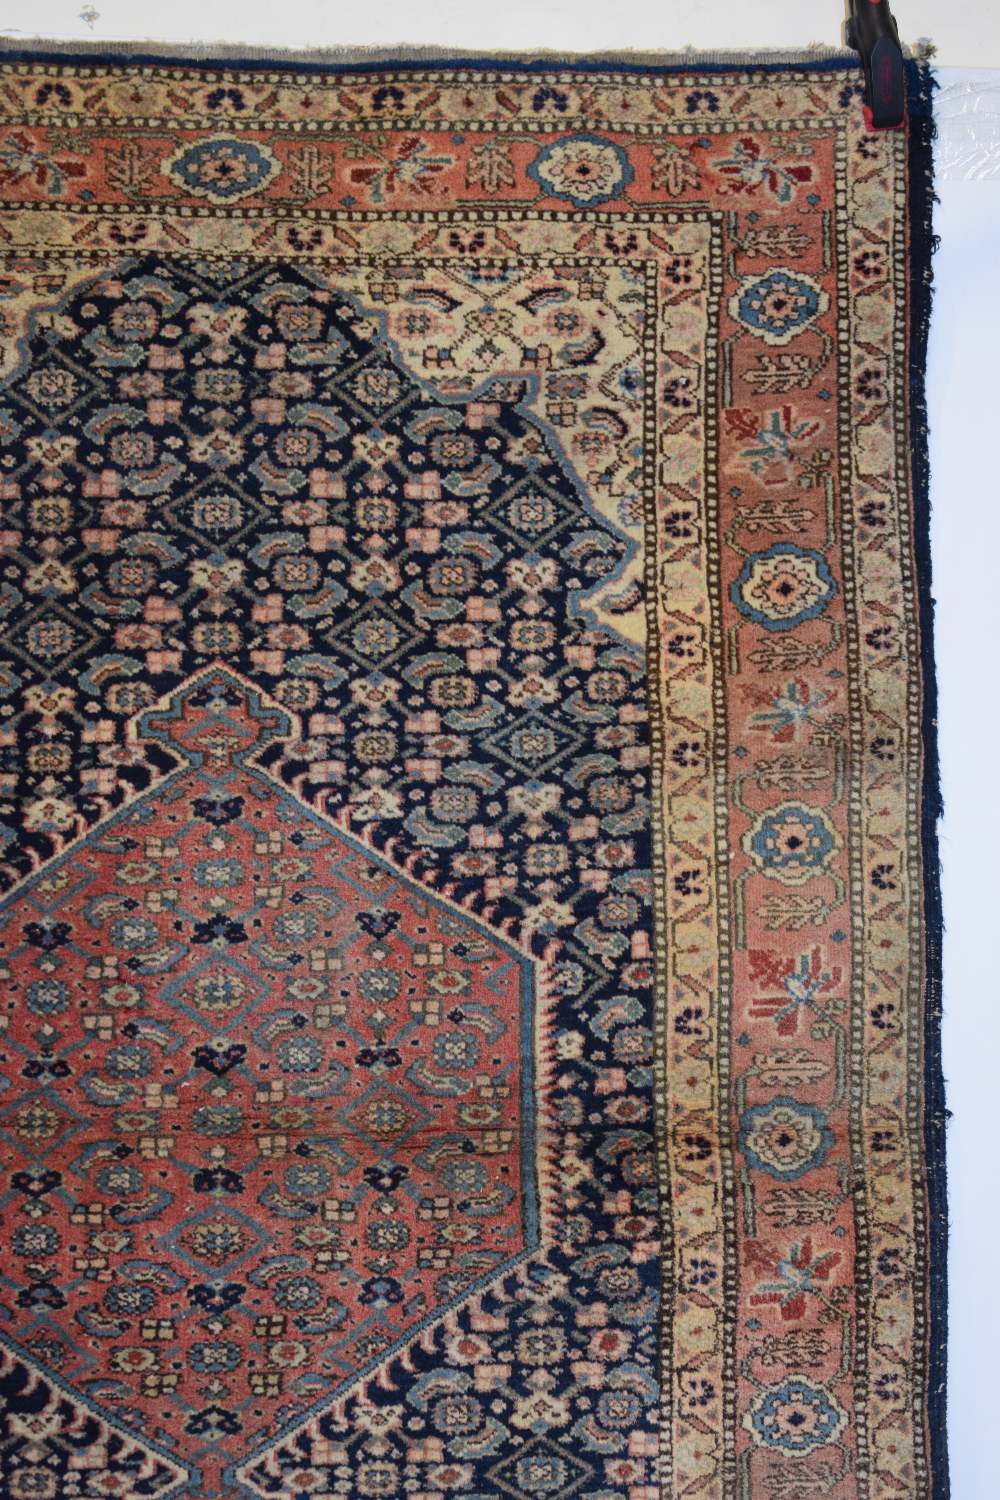 North west Persian rug, Ardabil or Tabriz district, circa 1950s, 5ft. 2in. X 3ft. 7in. 1.58m. X 1. - Image 3 of 8